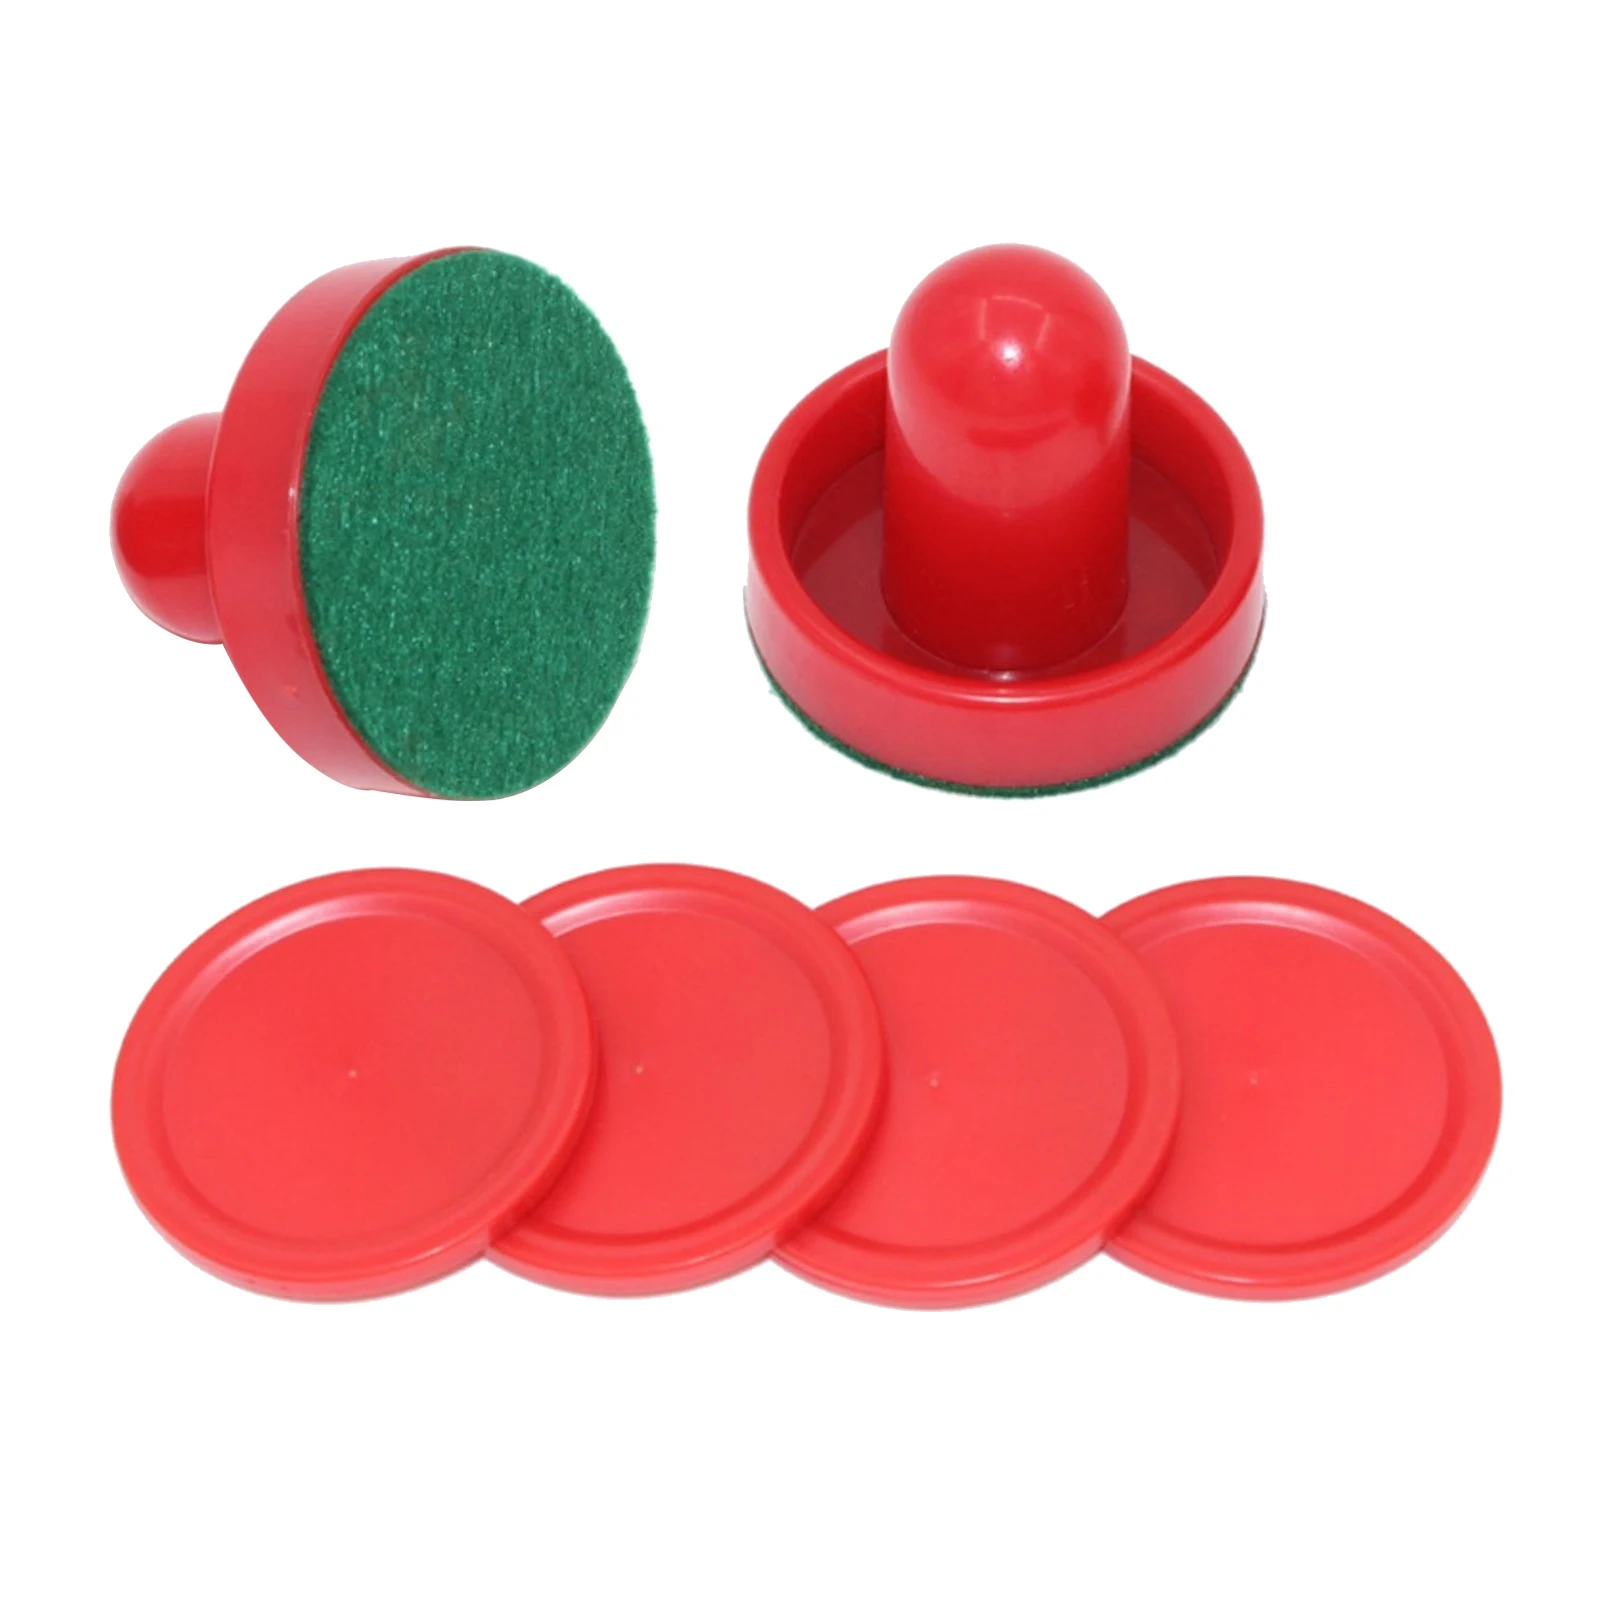 2 Red Air Hockey Pushers and 4 Red Pucks for Children MUZOCT Great Goal Handles Pushers Replacement Accessories for Game Tables 